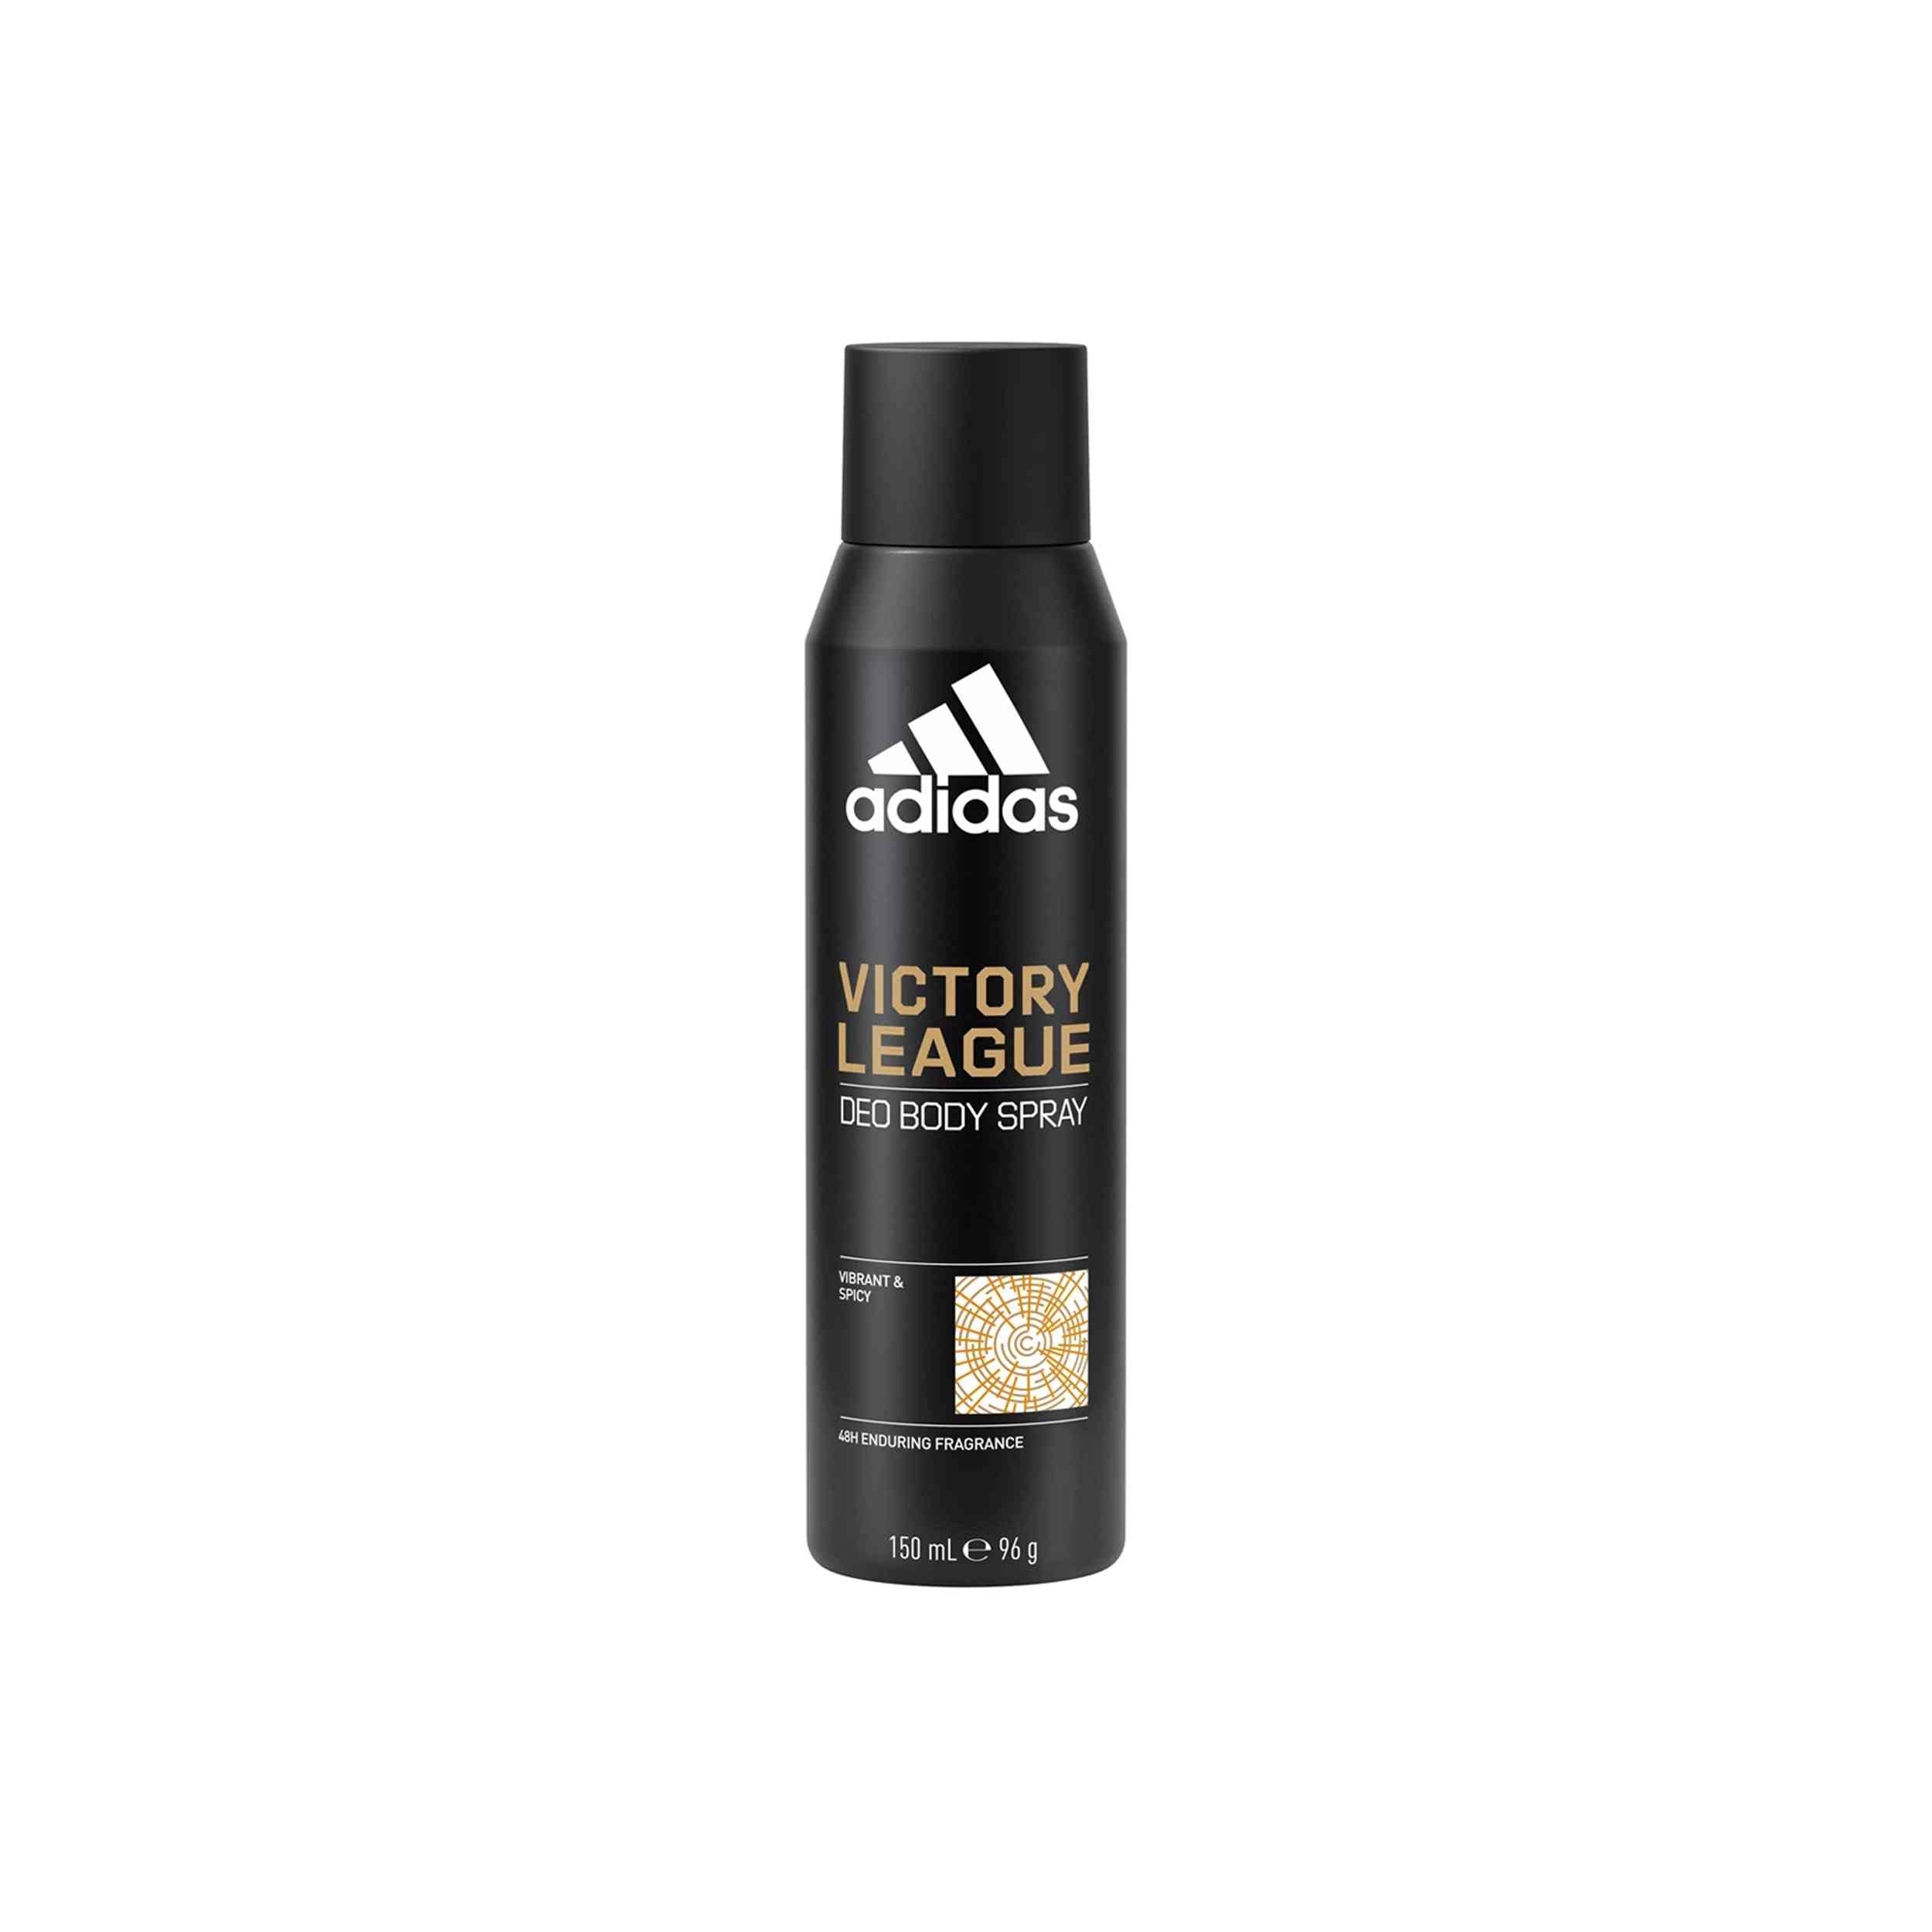 Adidas Victory League Deo